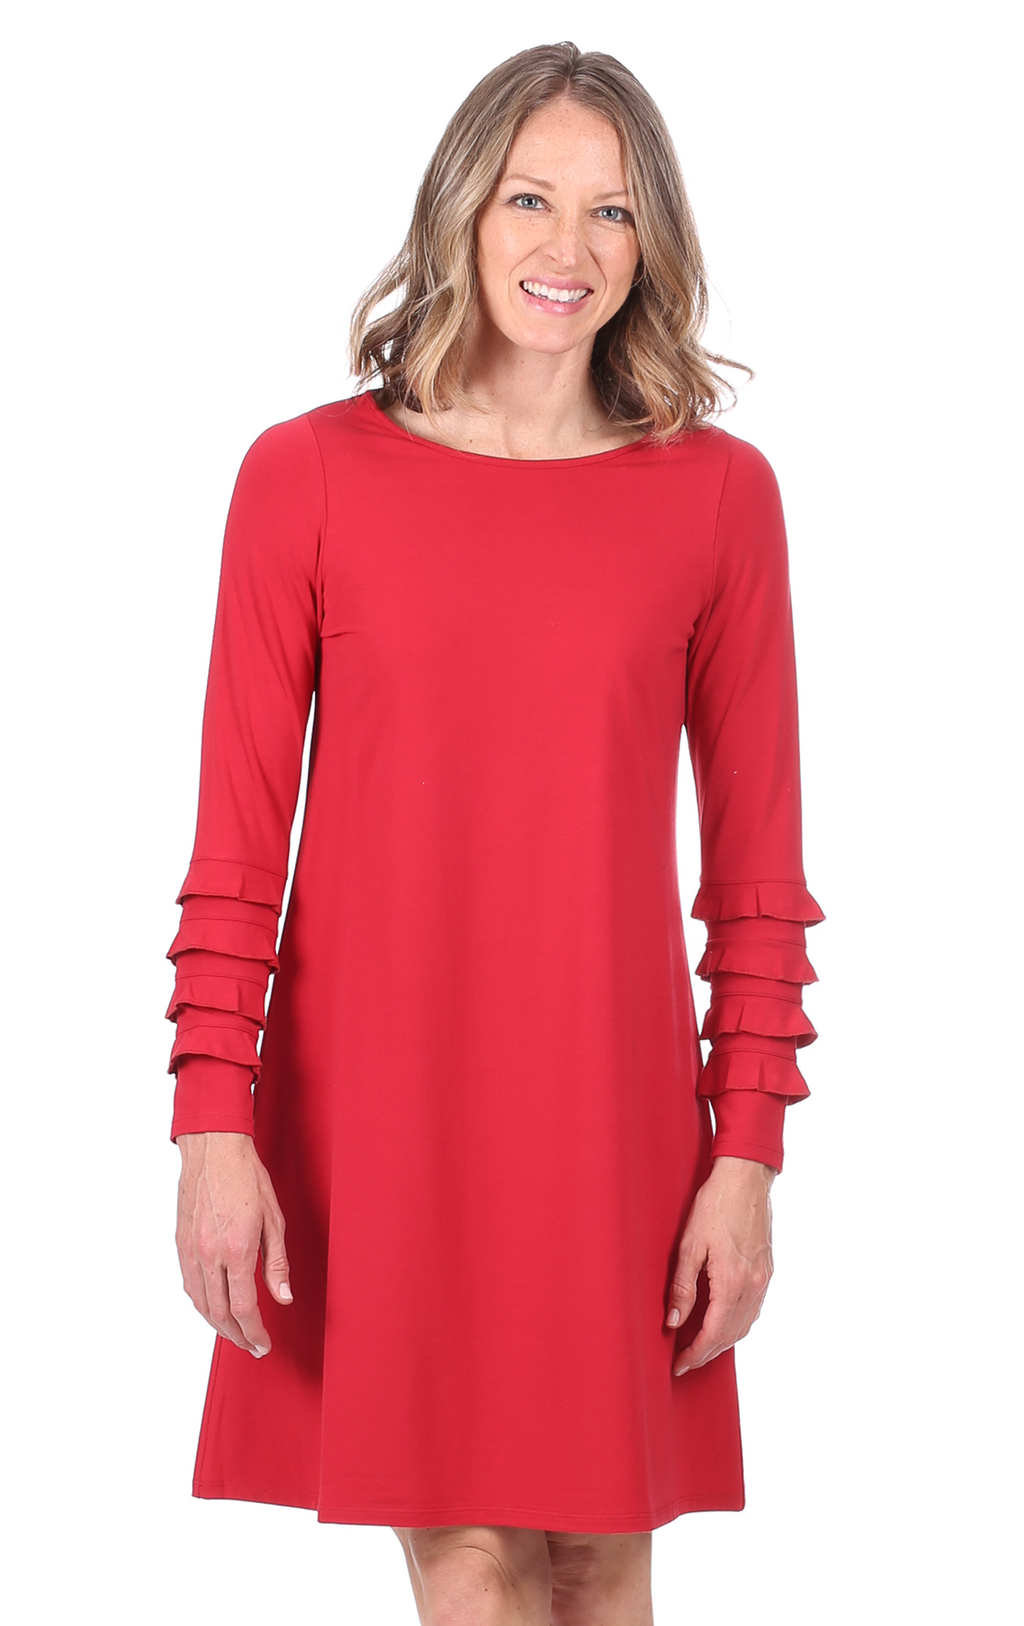 DUFFIELD LANE RED RADCLIFF DRESS